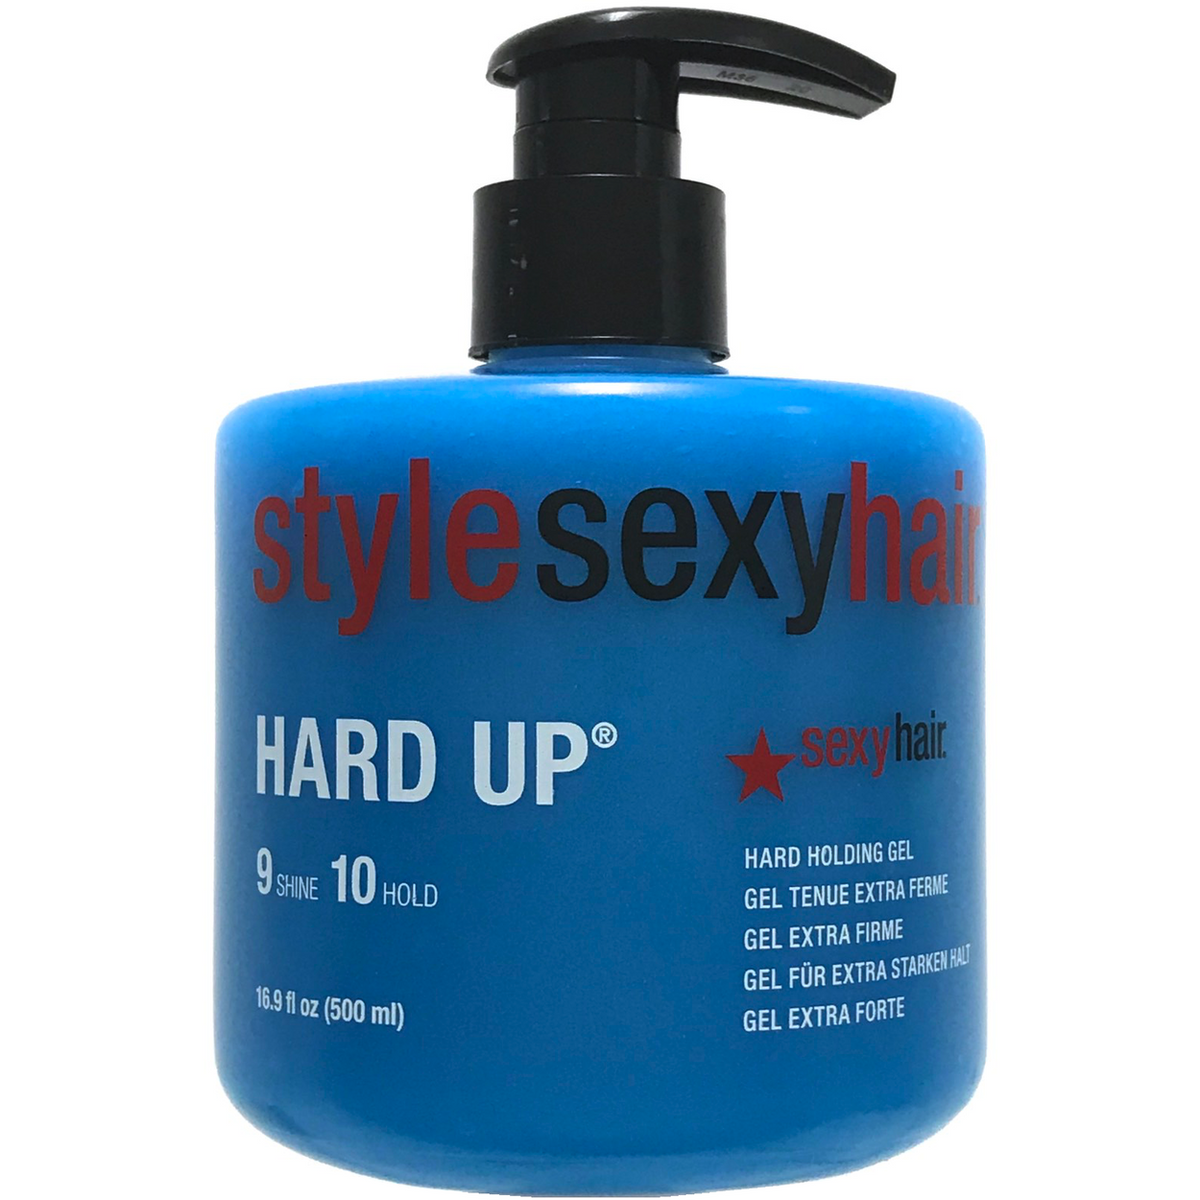  Smooth 'N Shine Gellation Styling Gel Super Hold 16 oz. : Hair  Gels : Beauty & Personal Care